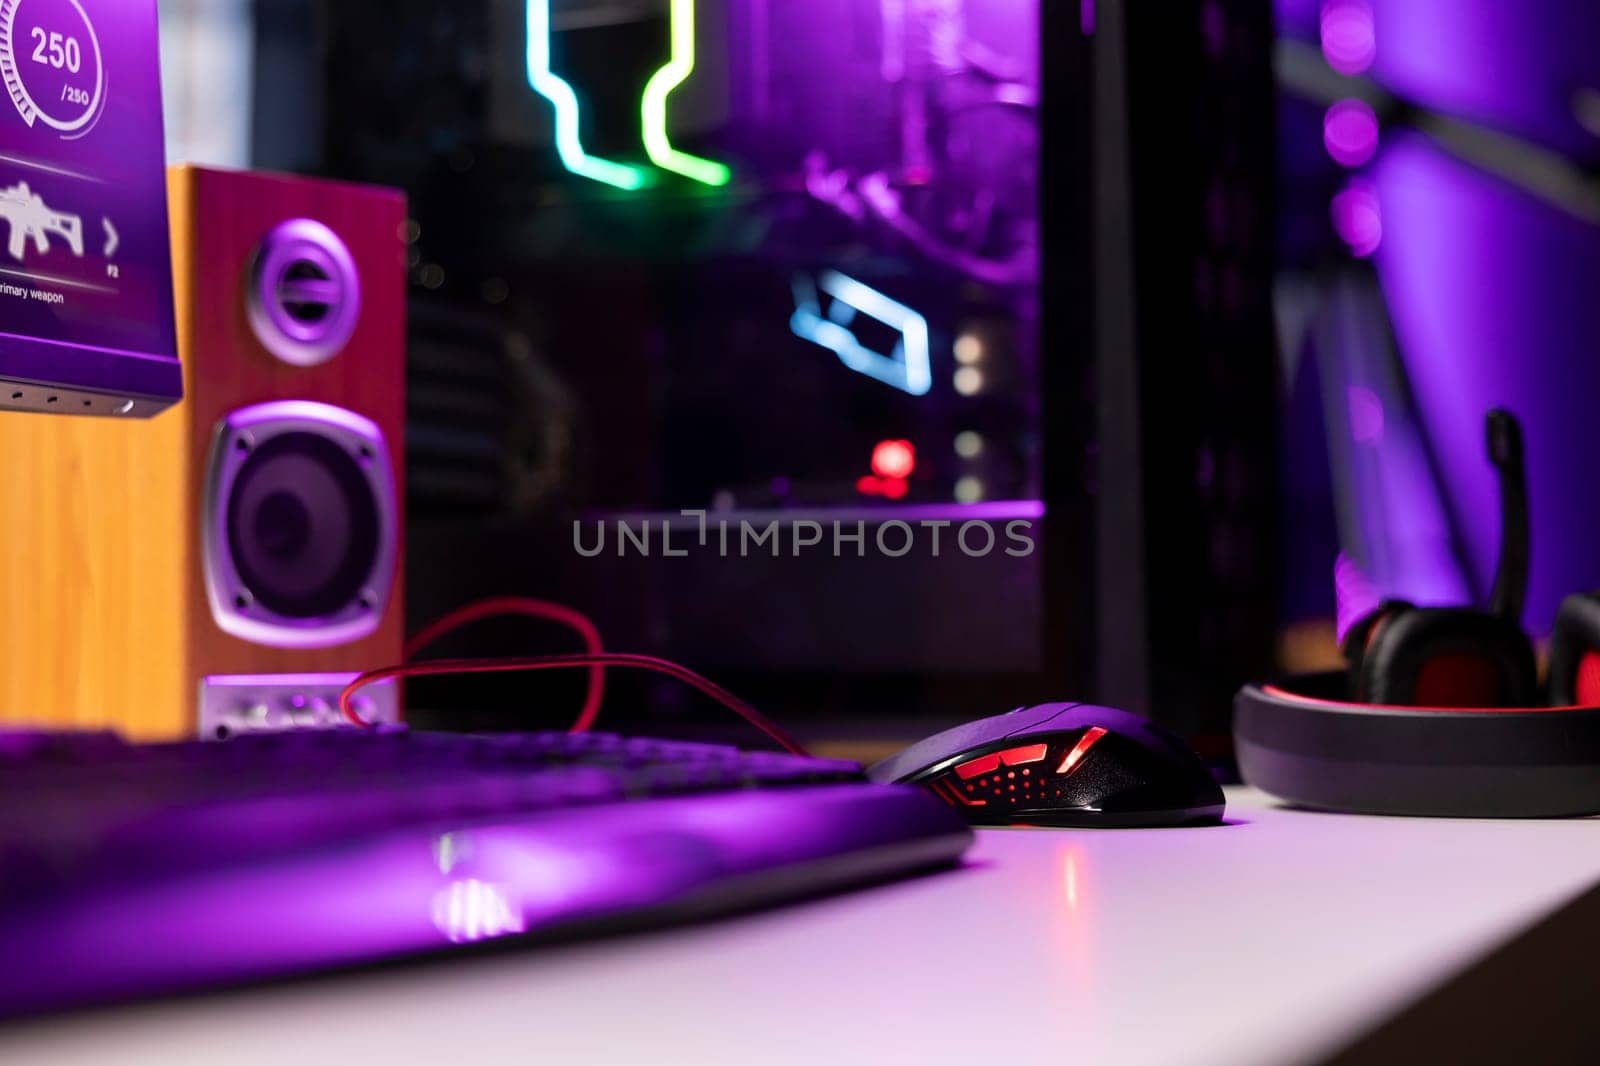 Neon lit components on opened gaming PC device next to keyboard, speakers, wired mouse and headphones in empty apartment. Computer in home with colorful gpu and cpu parts, close up shot